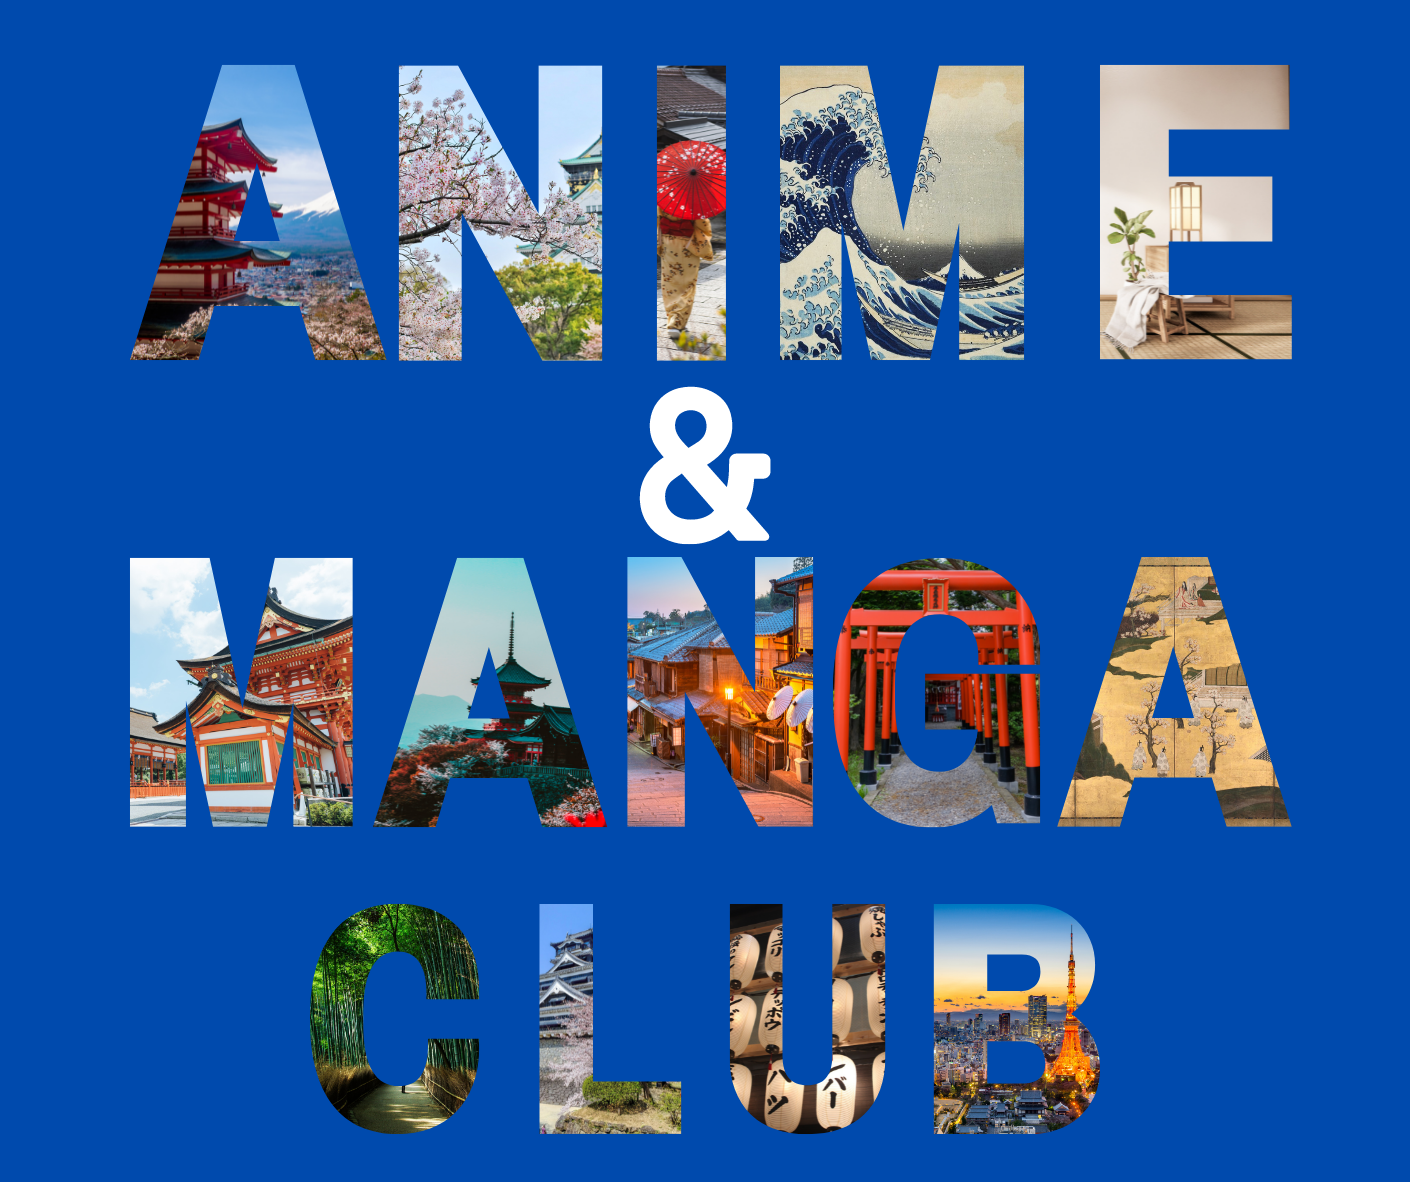 Anime & Manga Club in block letters with each letter showing a different Japanese related picture against a blue background.